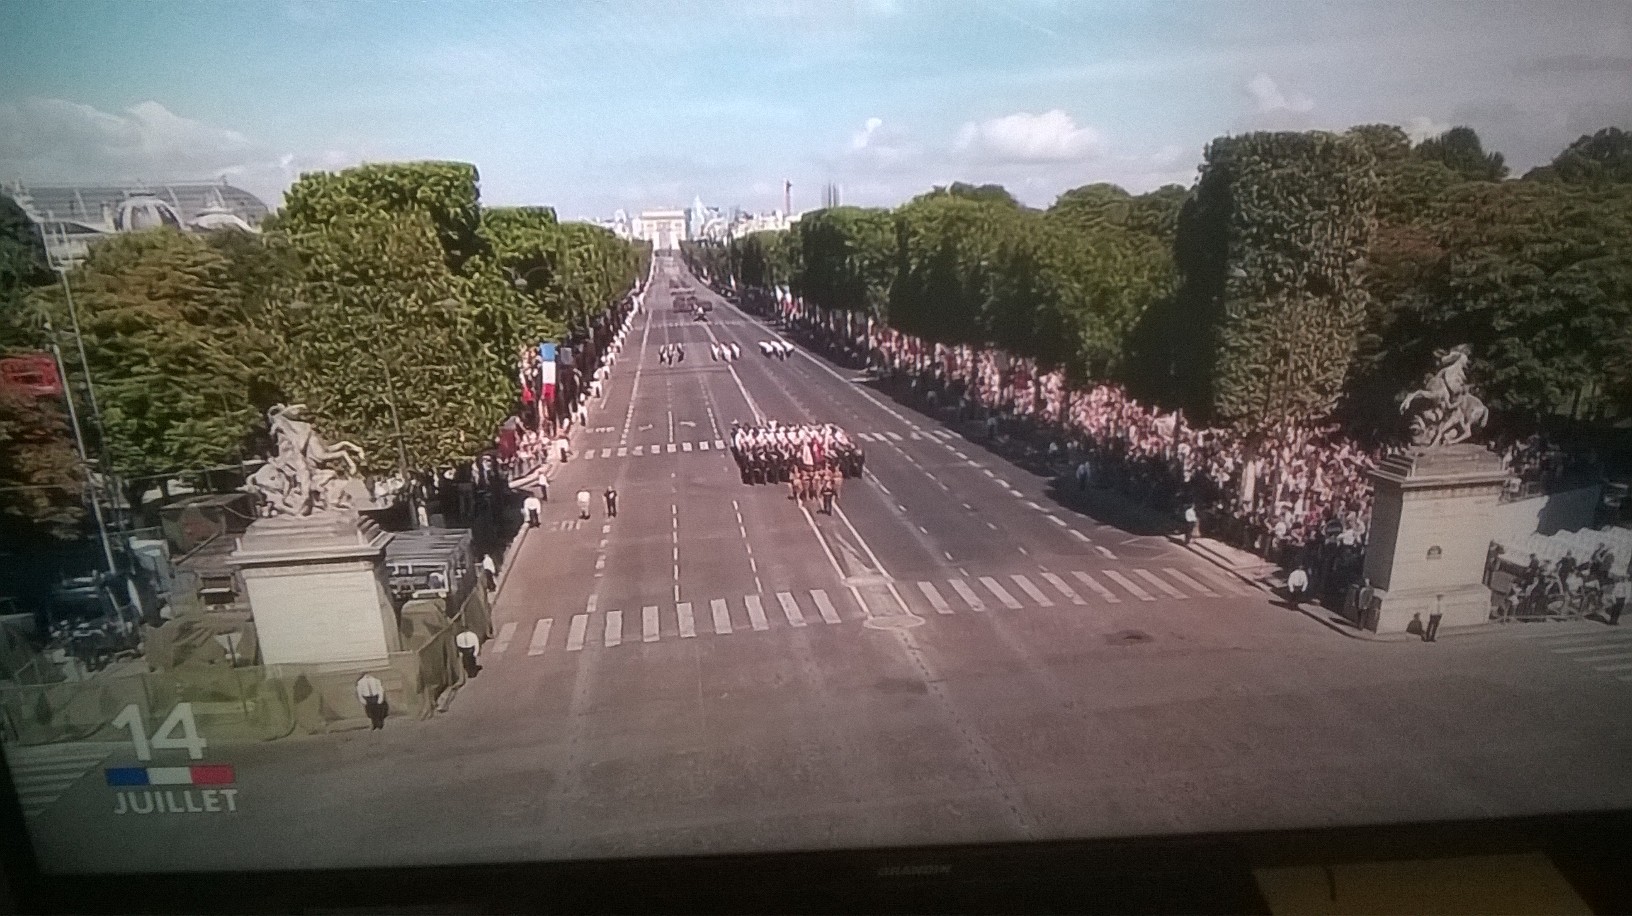 paris 14 july champs elysees from ent concorde americans jul17